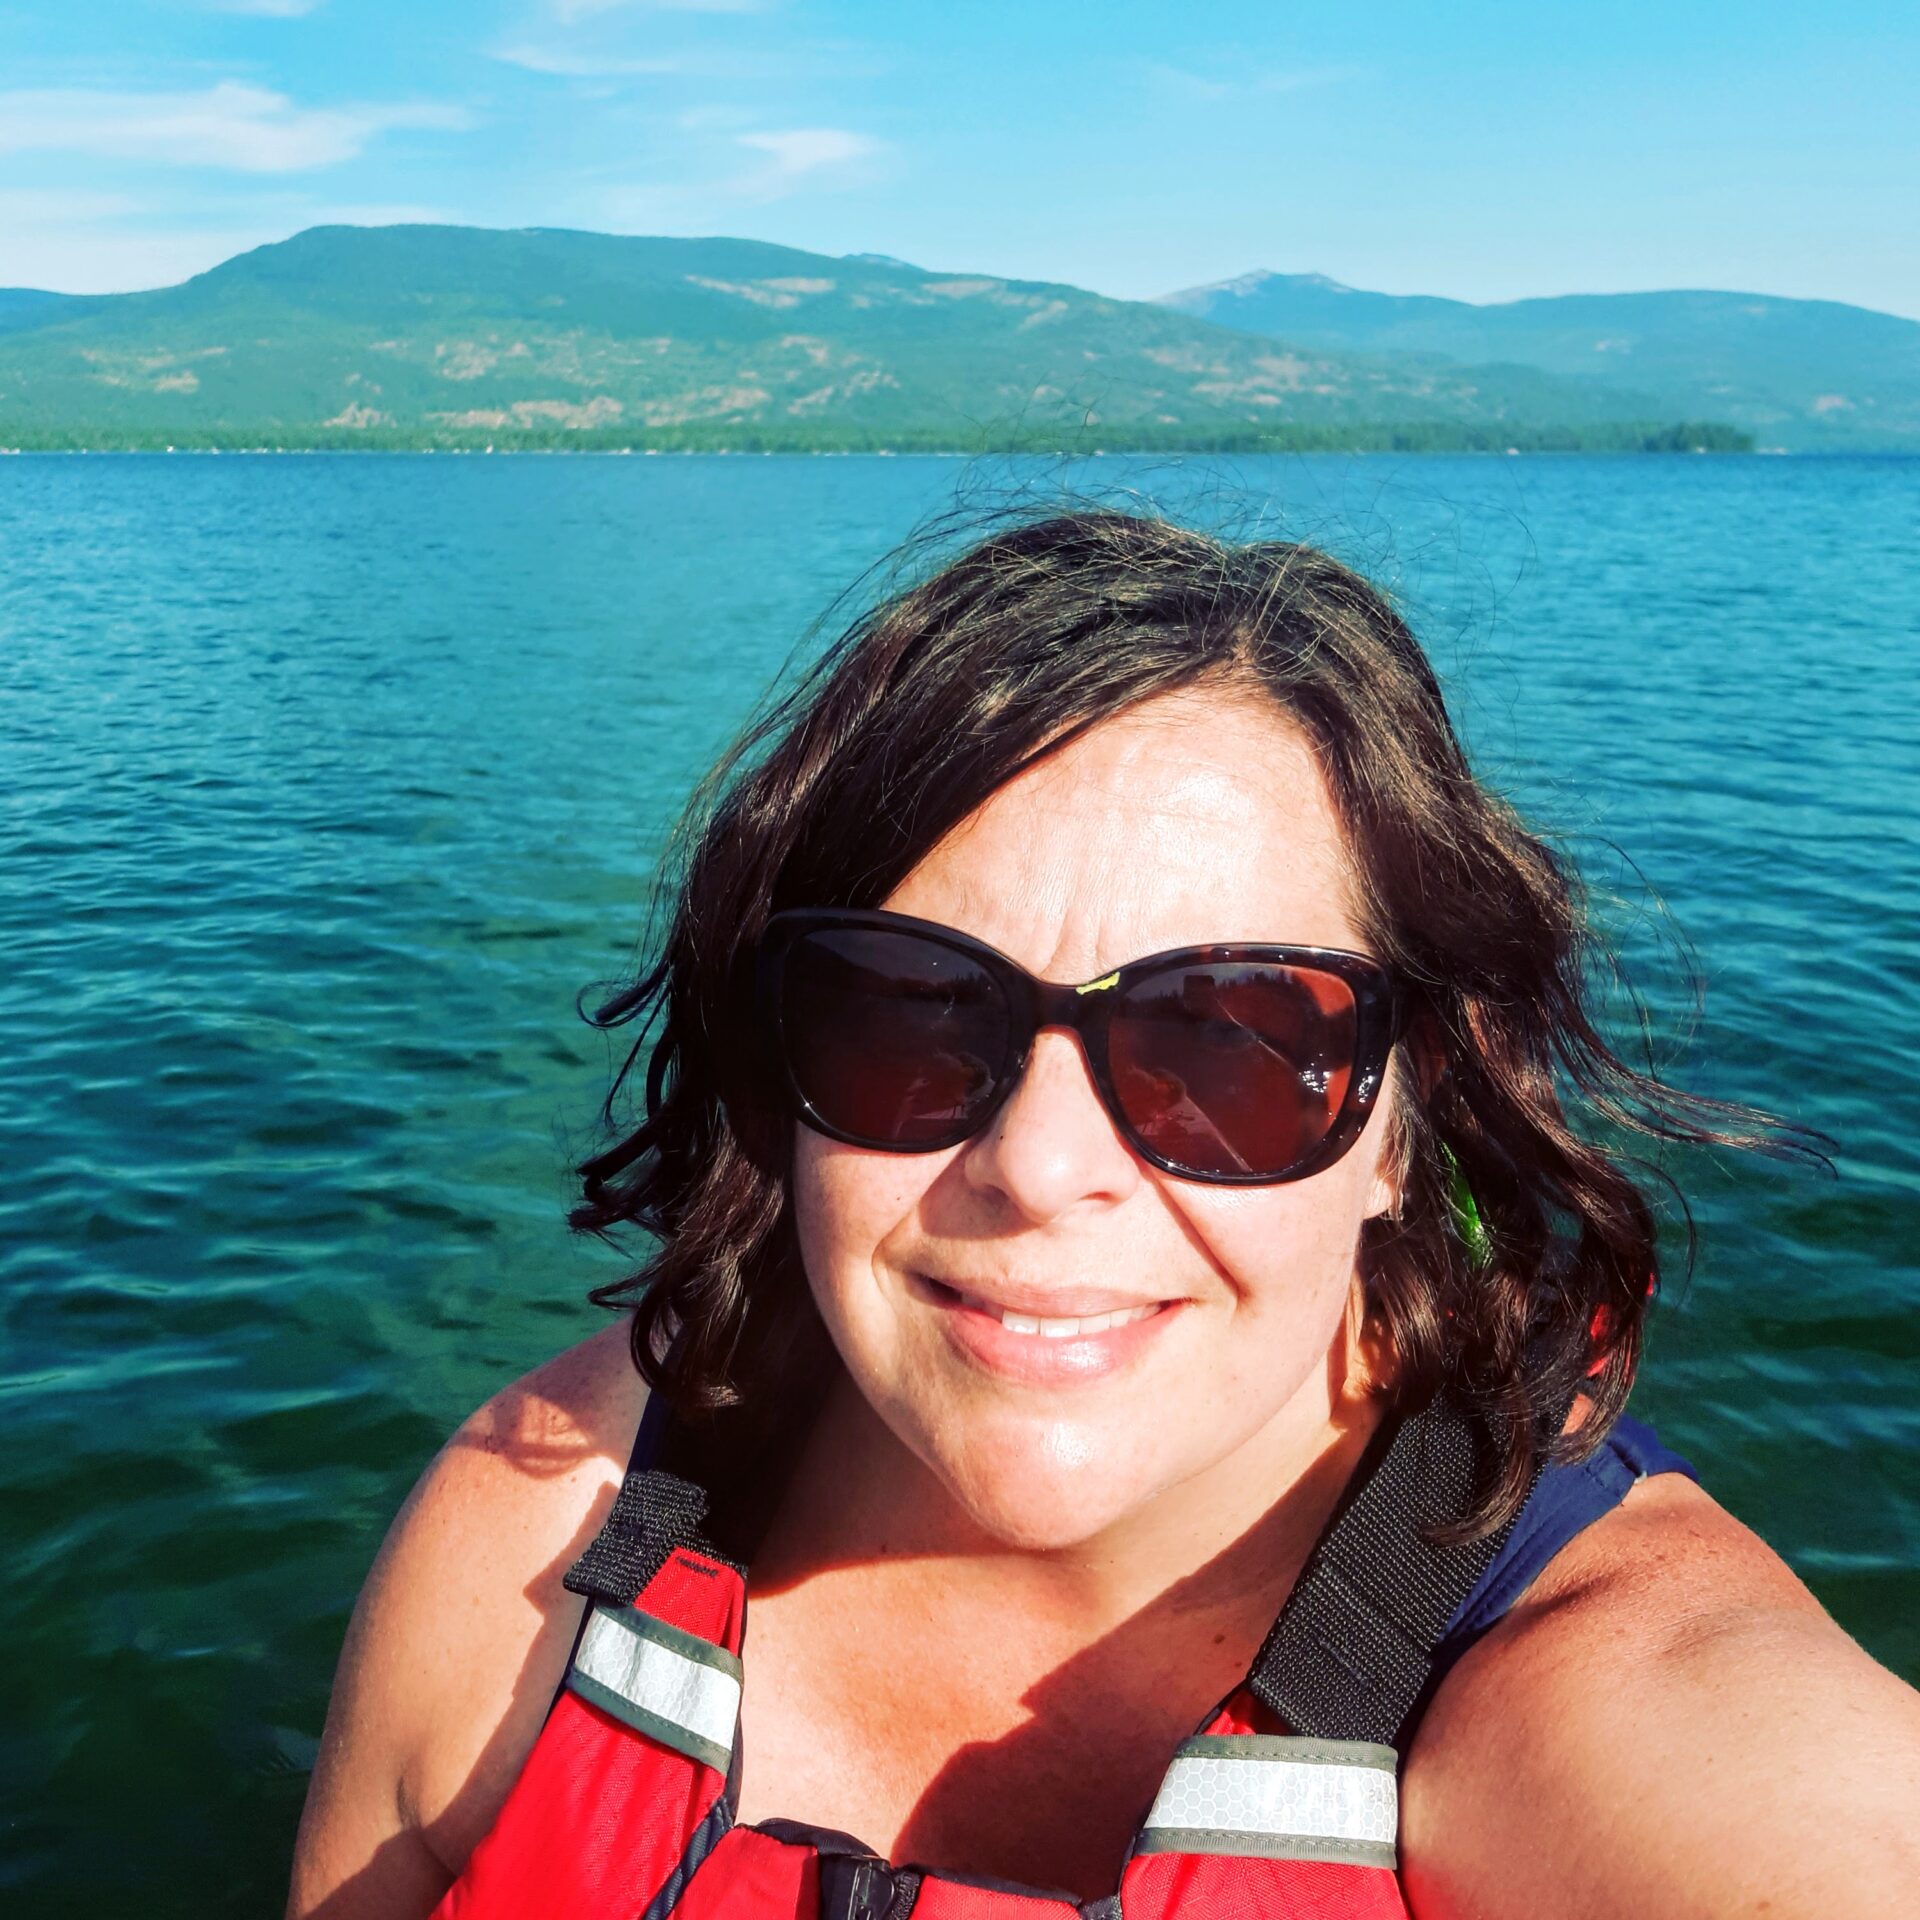 Amy paddling on Priest Lake -- wearing a red PFD with a background view of the lake and mountains.